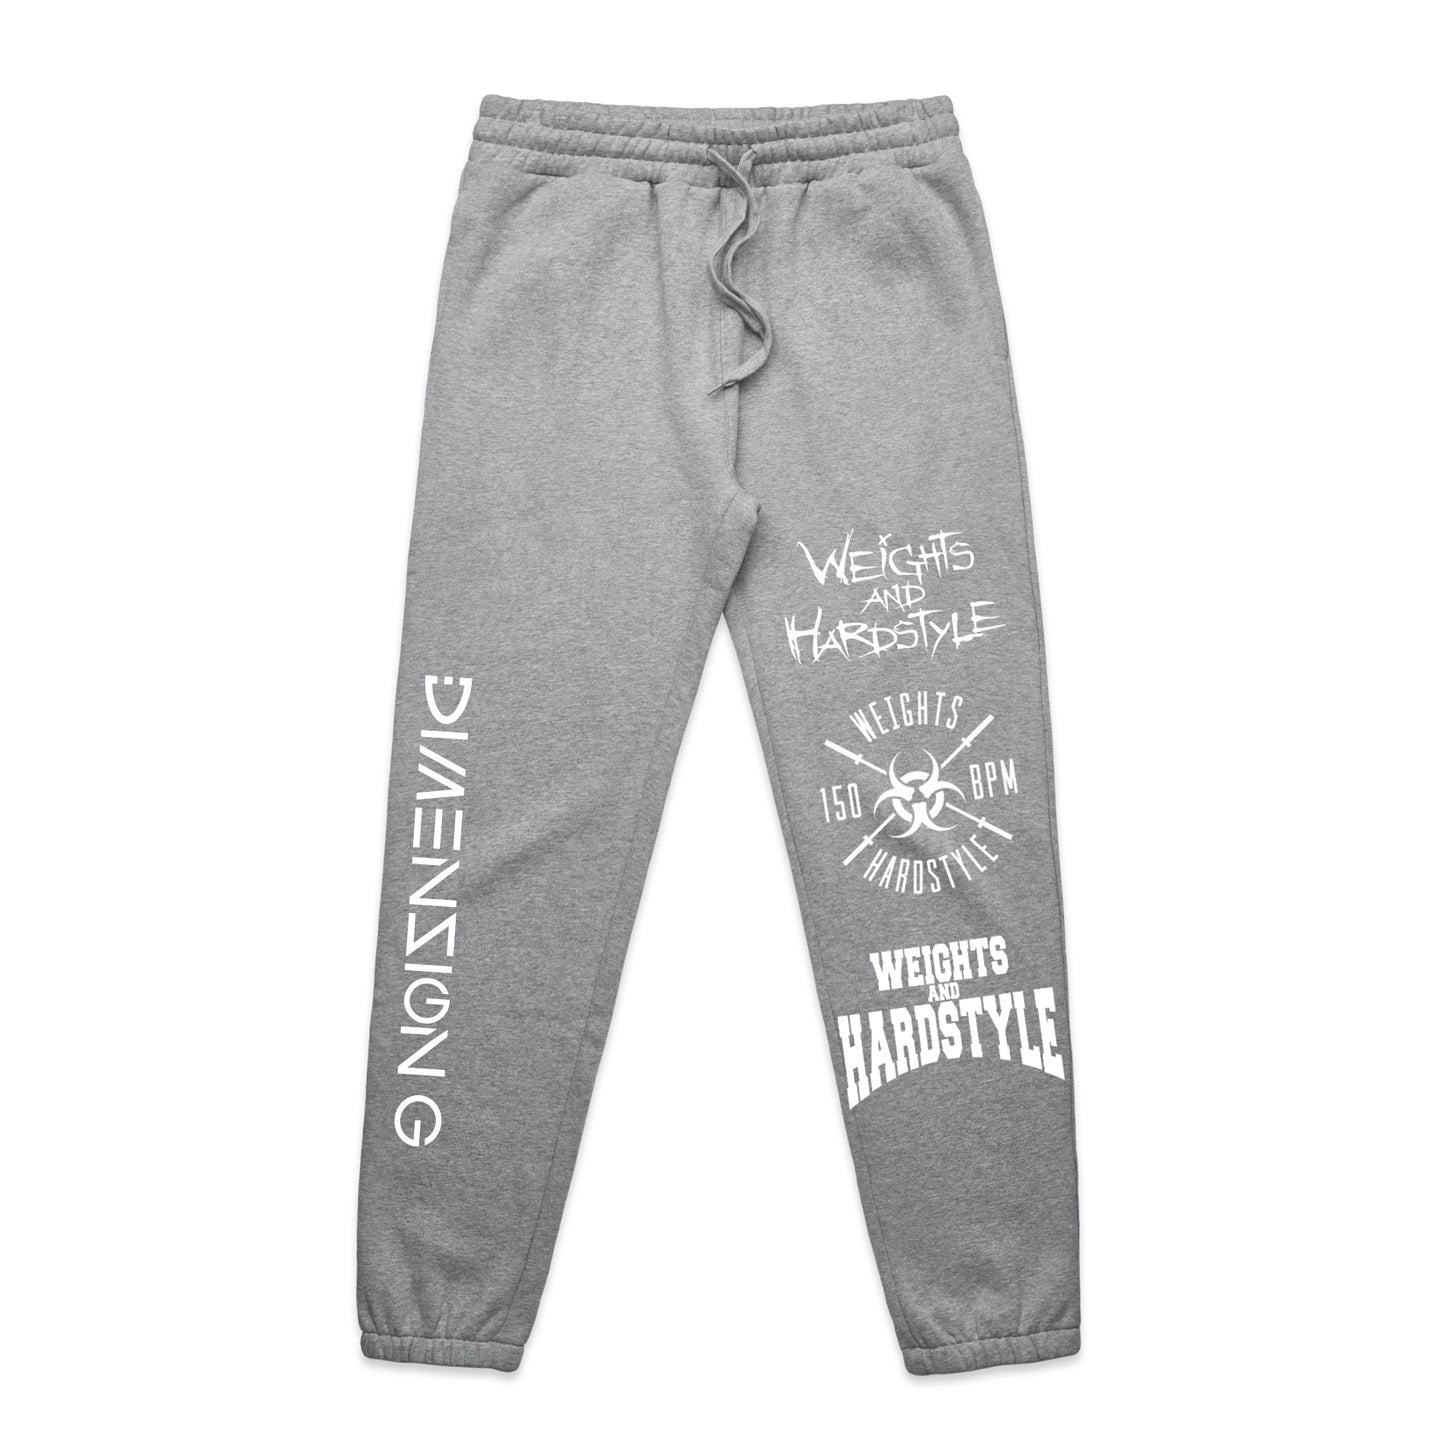 Weights and Hardstyle Joggers